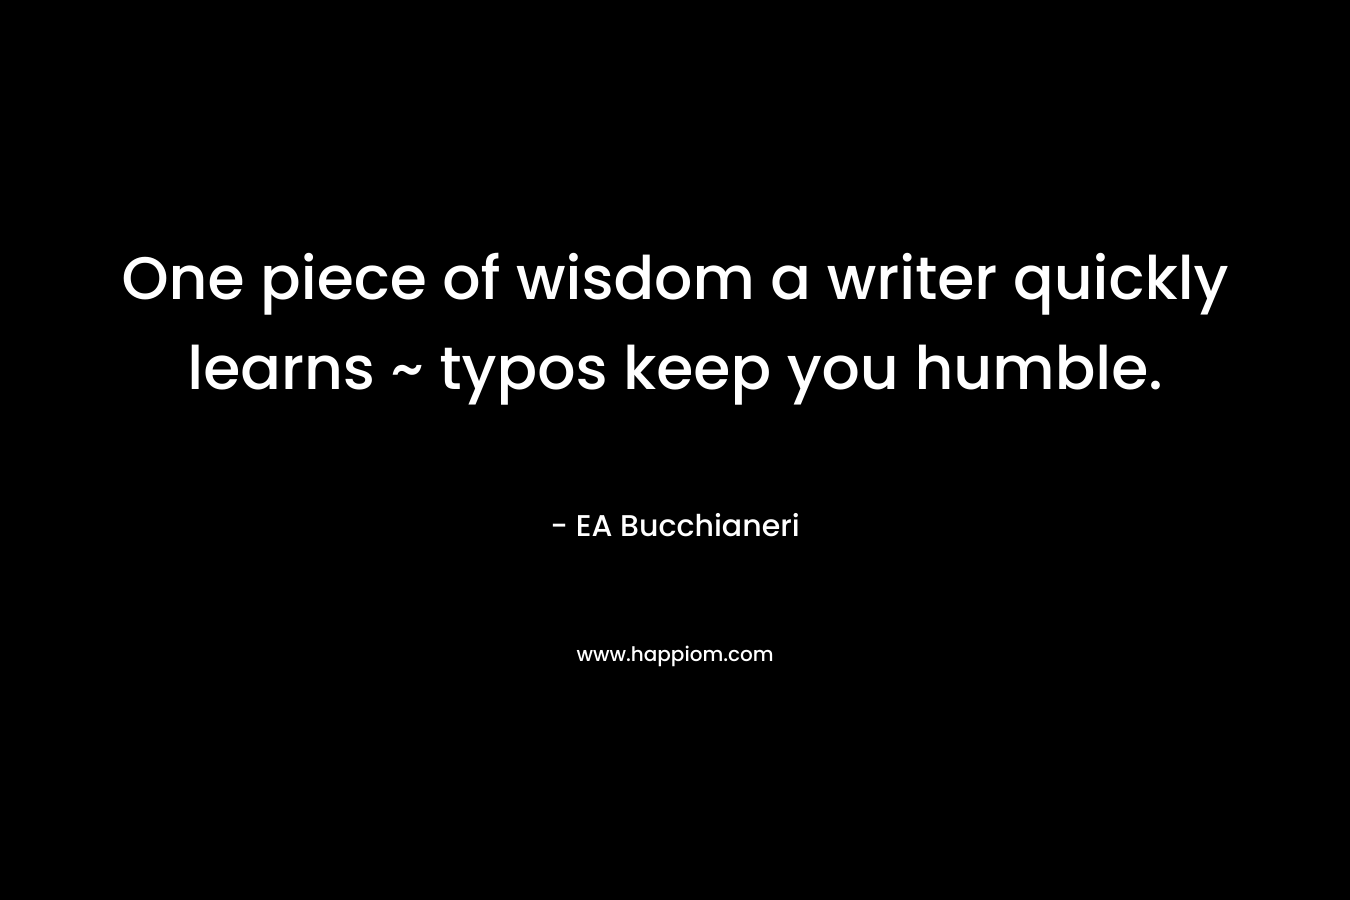 One piece of wisdom a writer quickly learns ~ typos keep you humble.